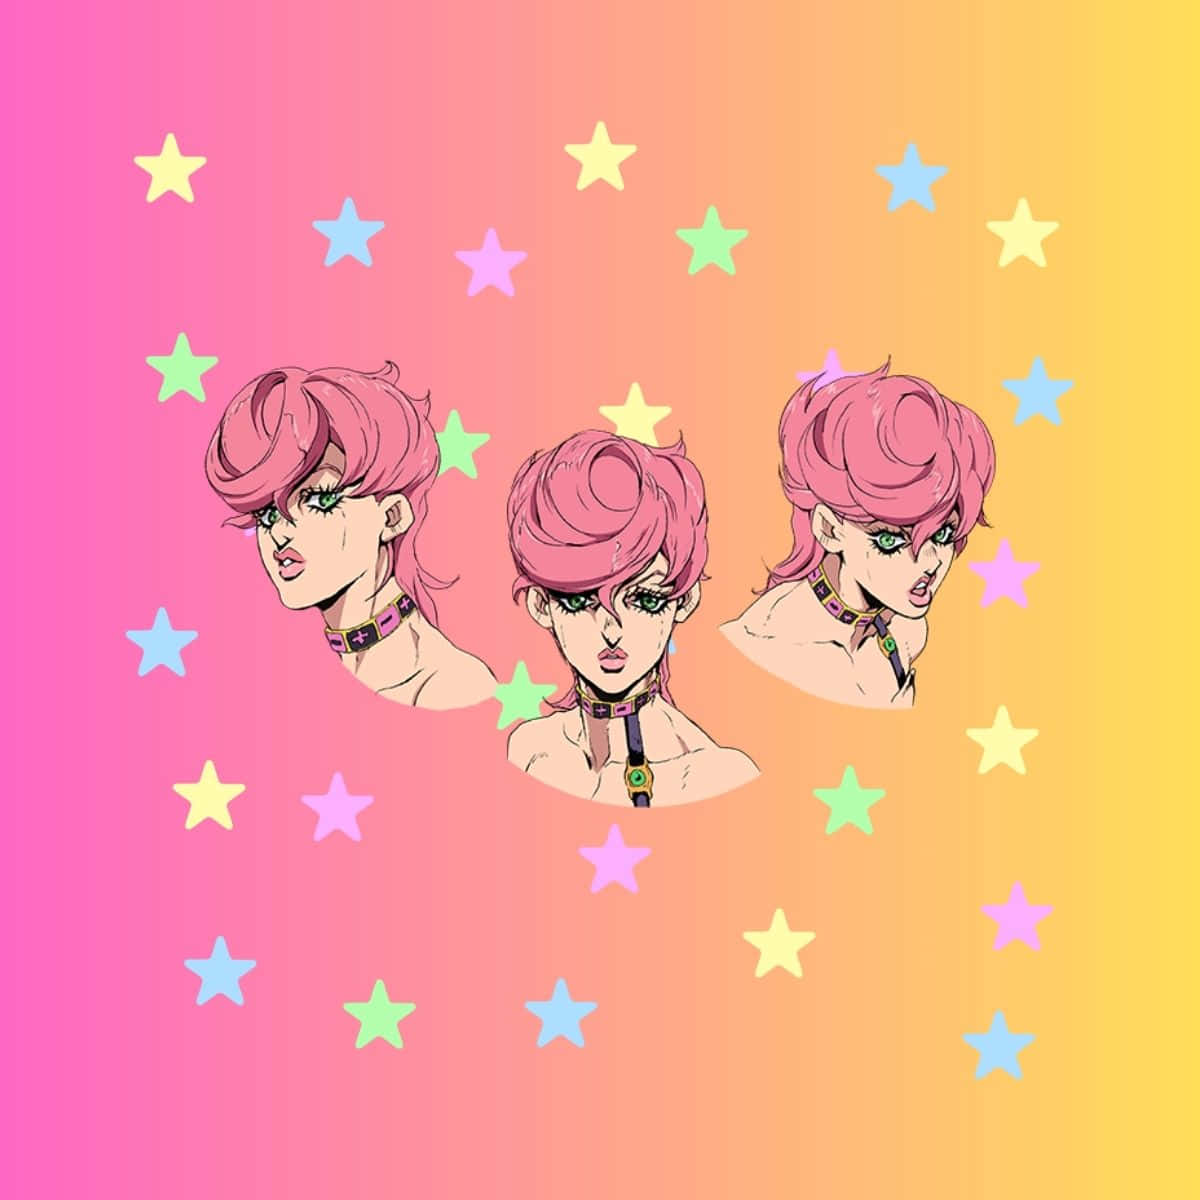 Trish Una striking a stylish pose in her fashionable outfit. Wallpaper